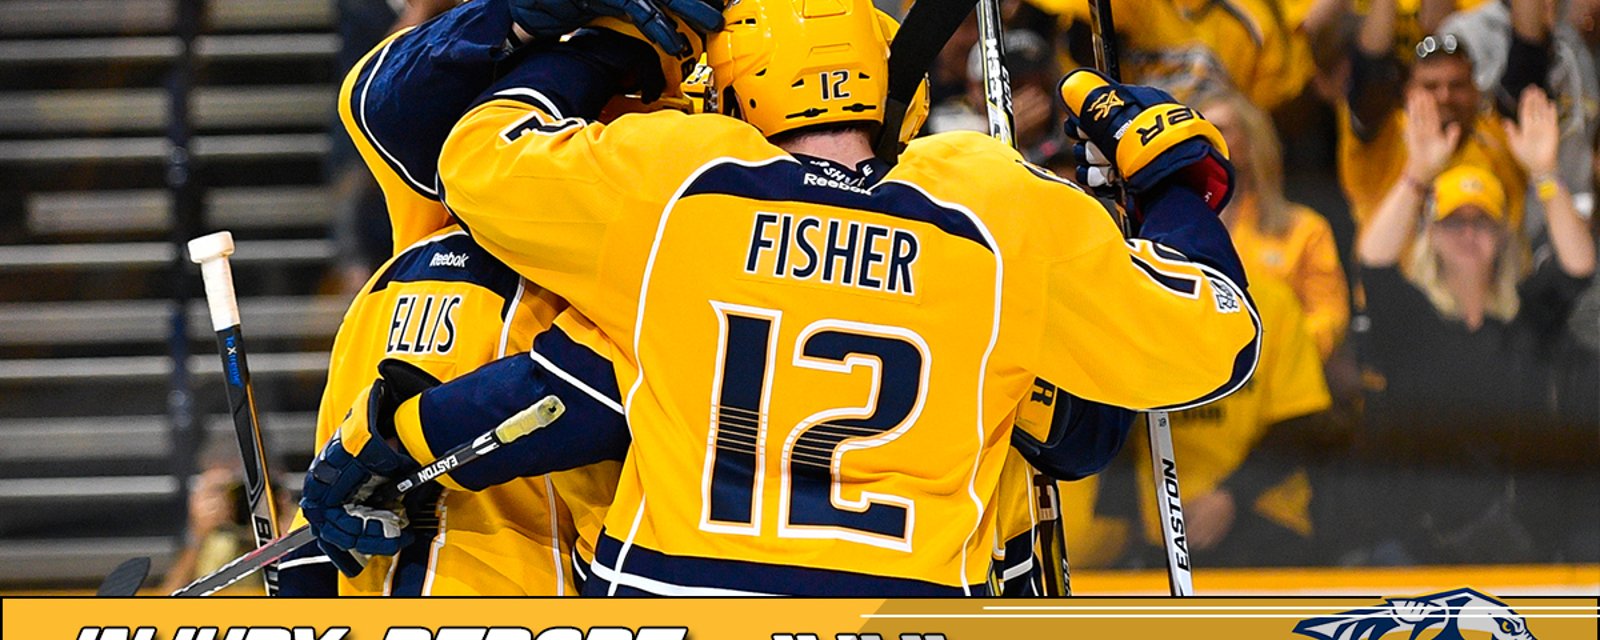 Injury Report: Fisher’s status updated for game 1